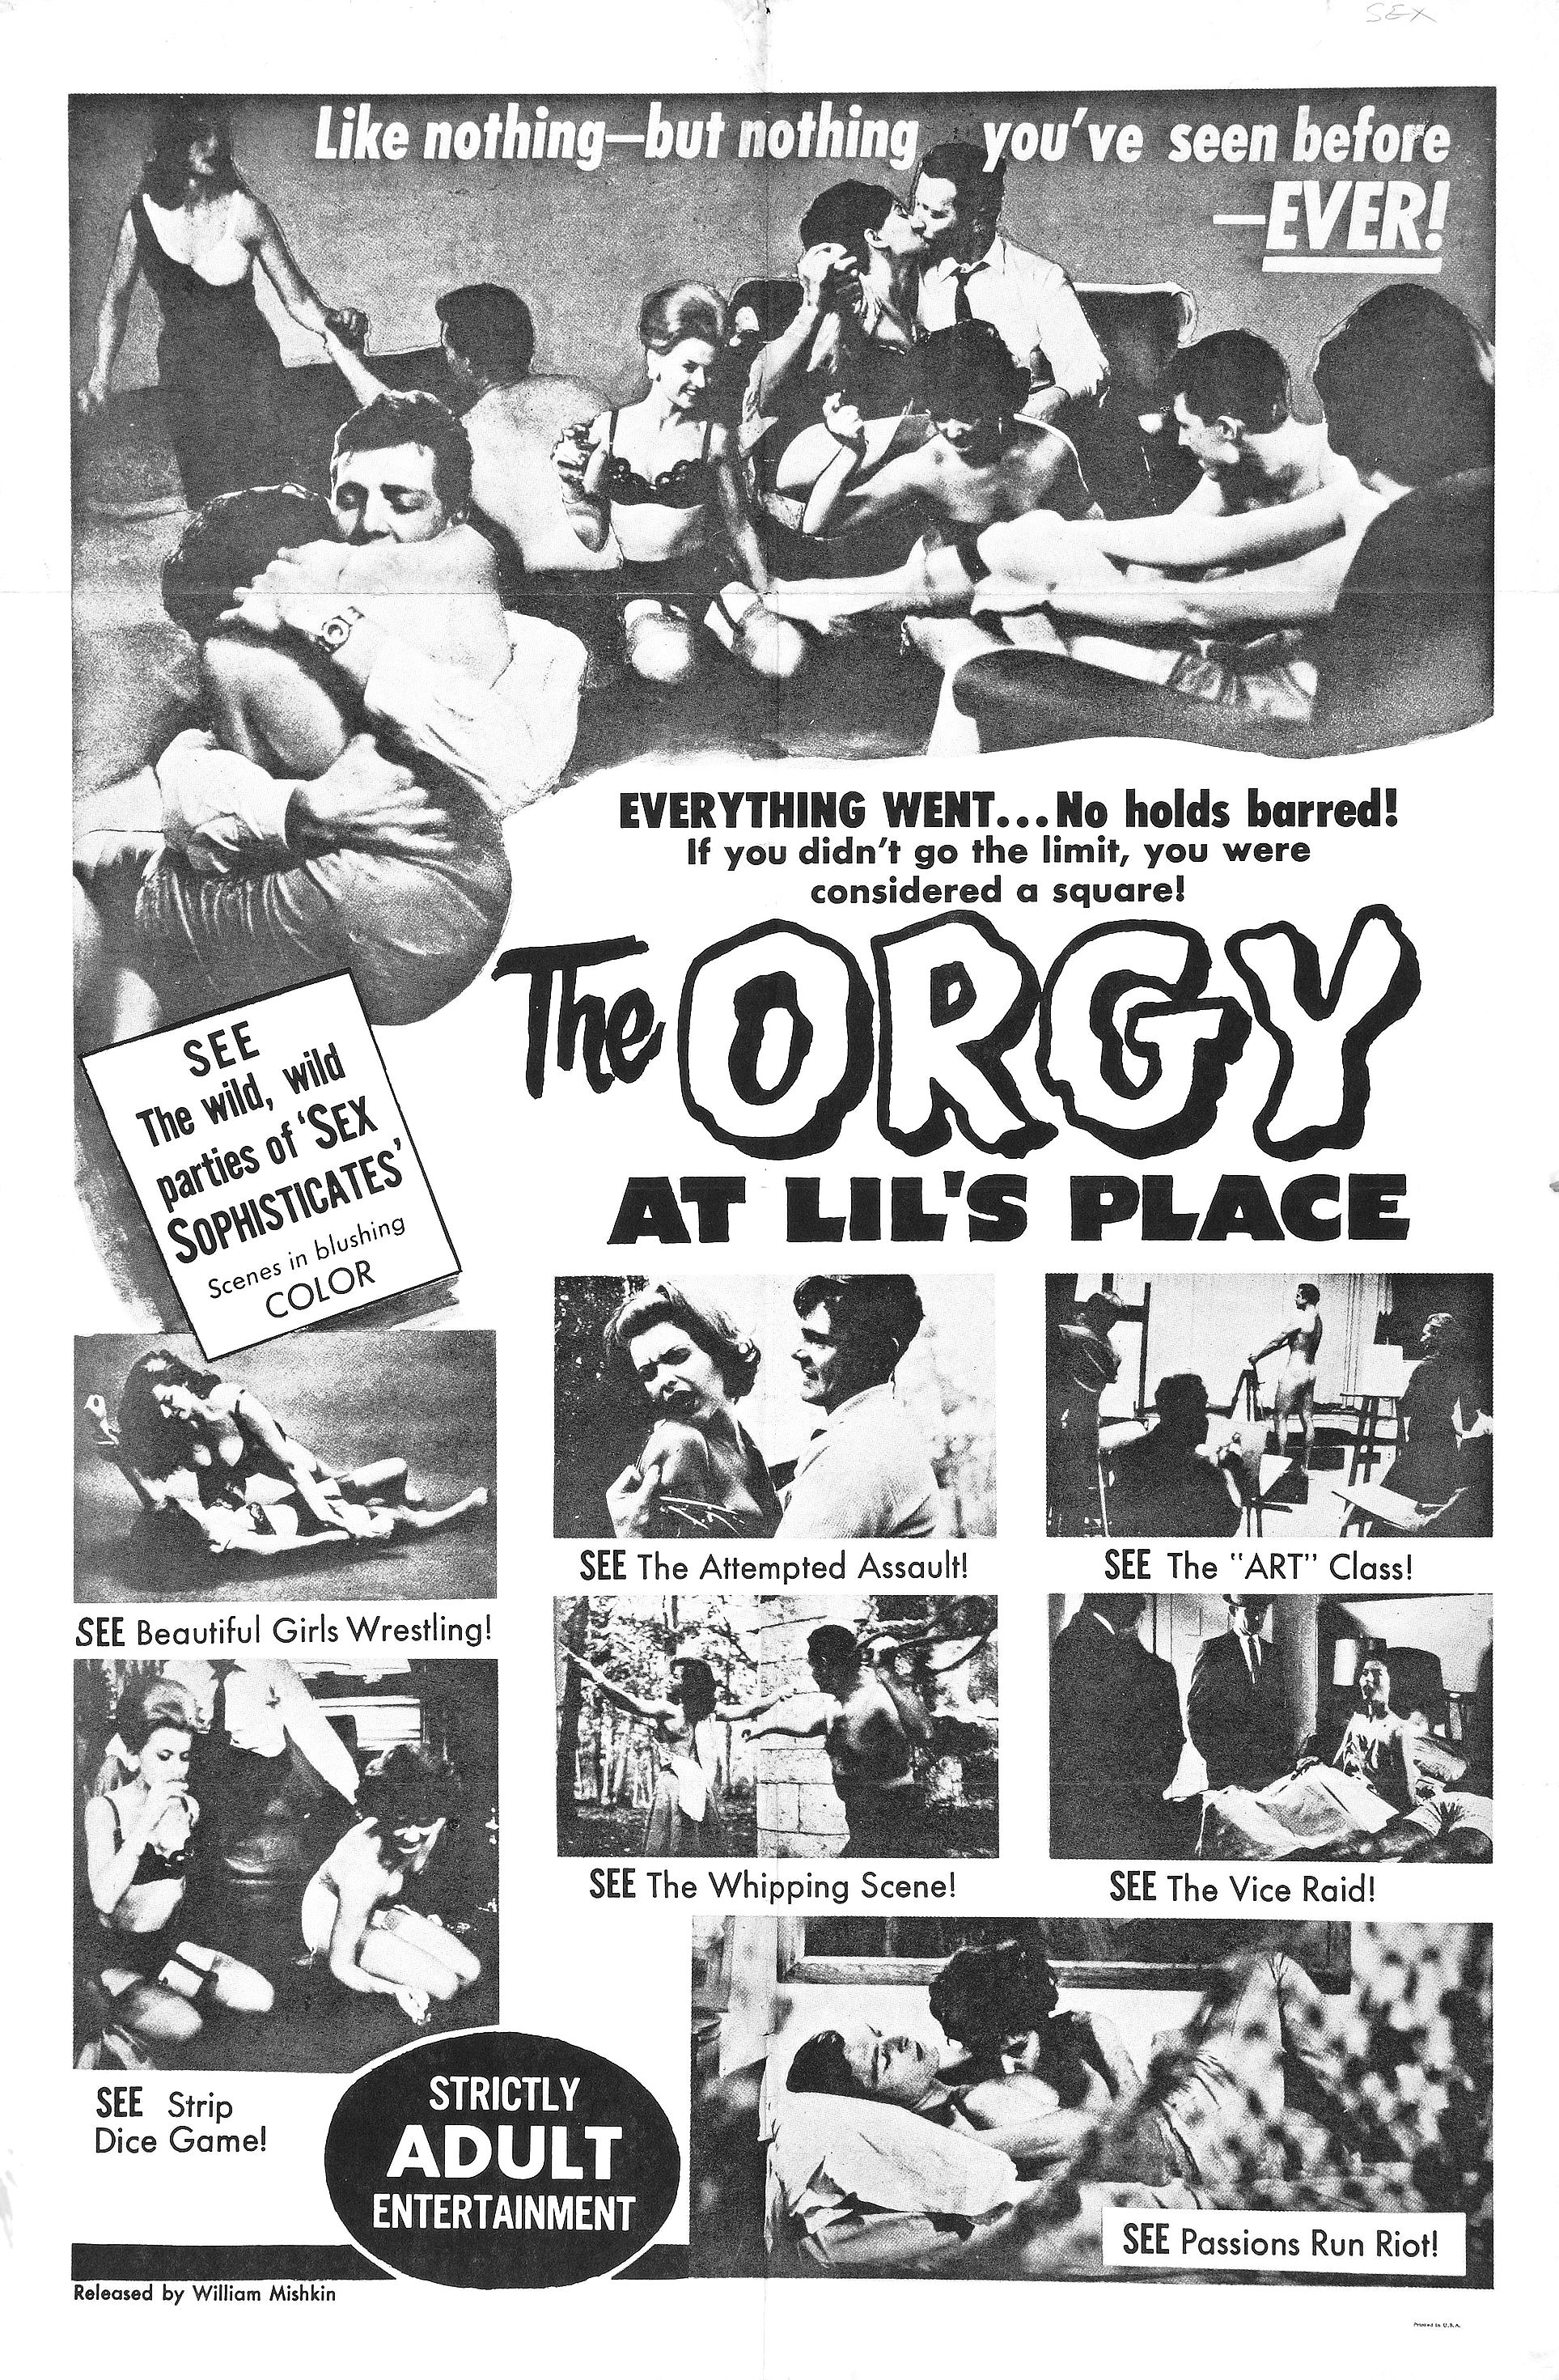 The Orgy at Lil's Place (1963) Screenshot 4 